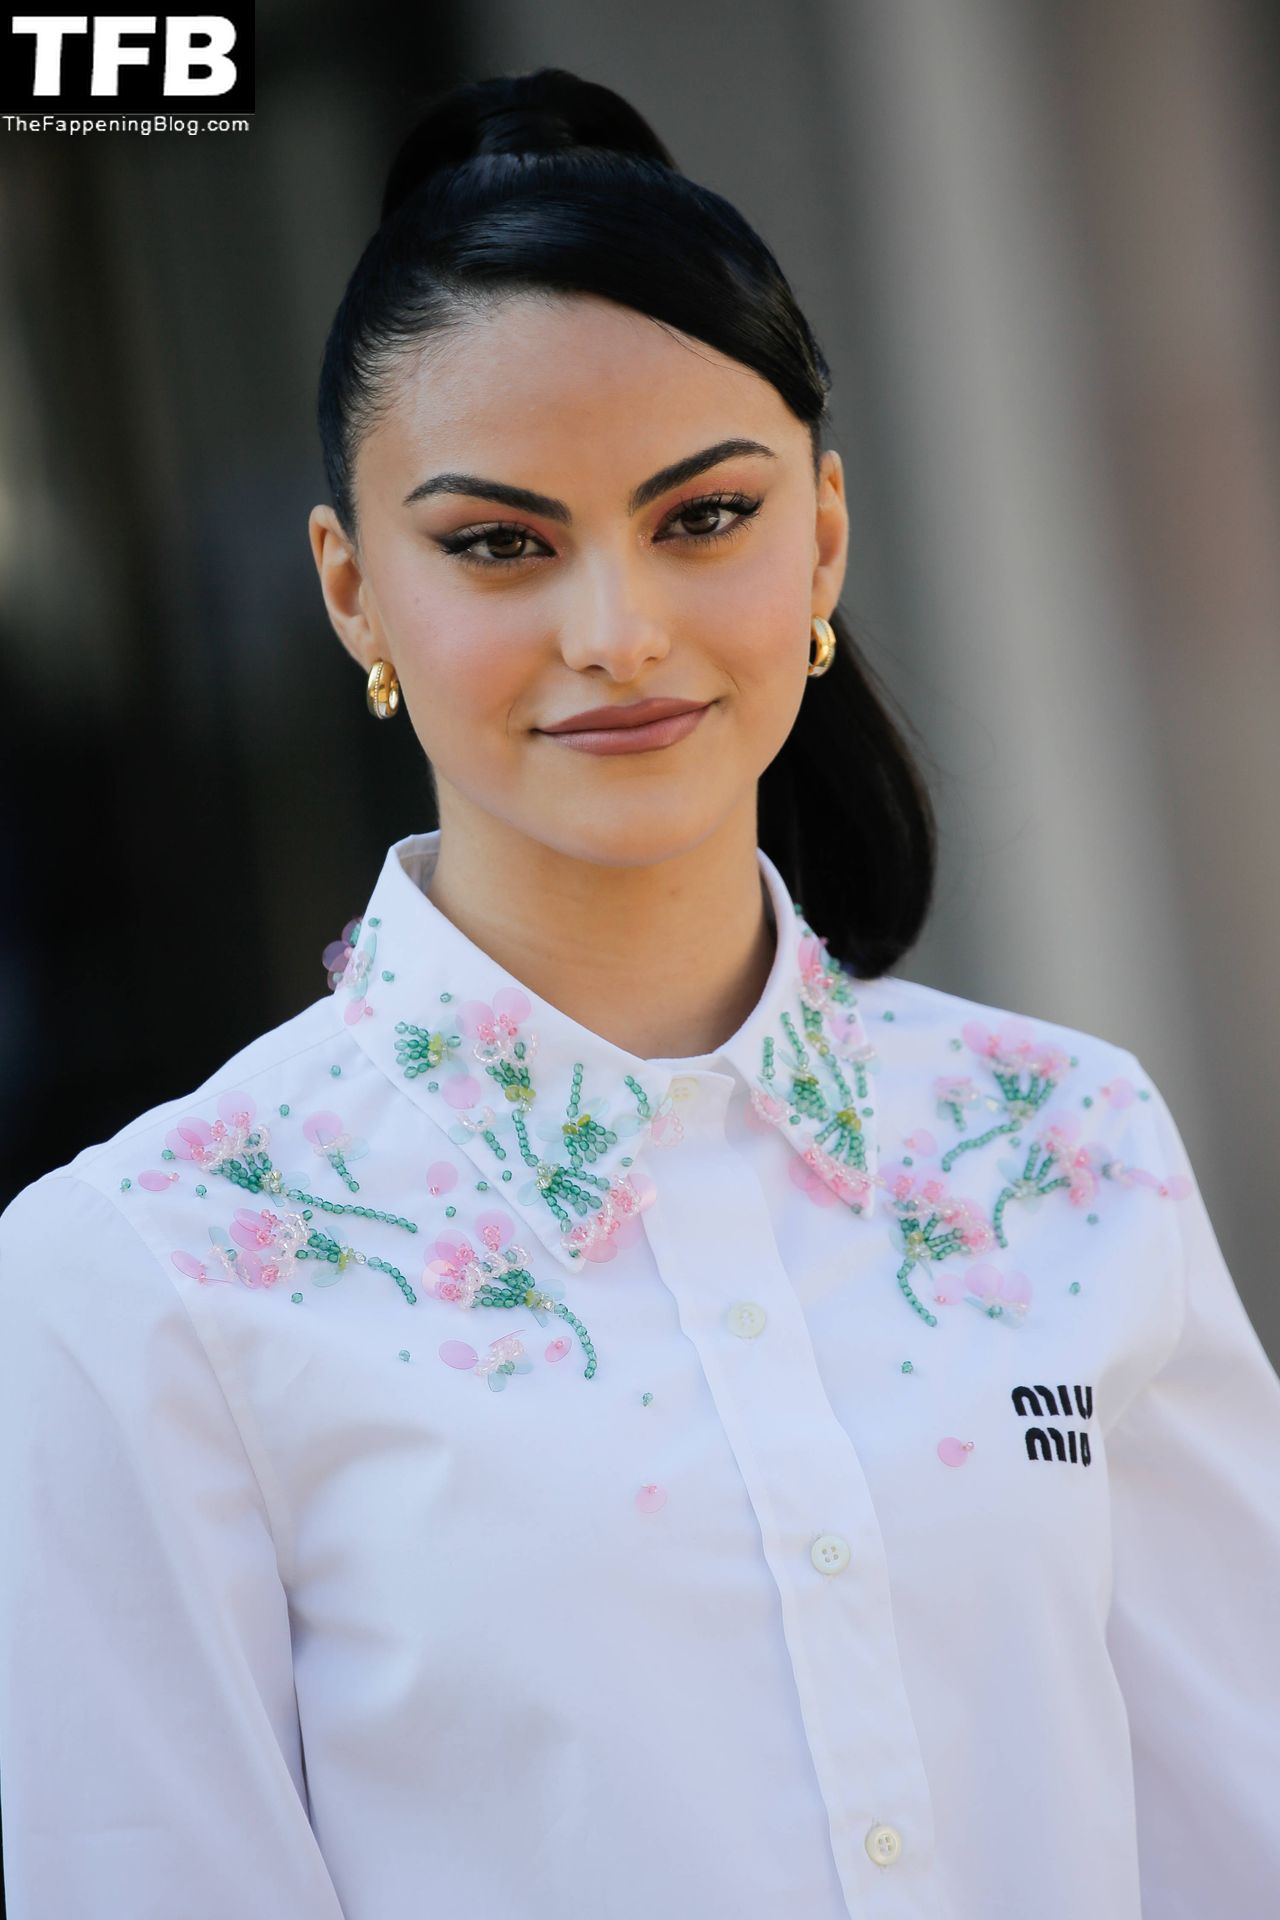 Camila-Mendes-Sexy-The-Fappening-Blog-11.jpg